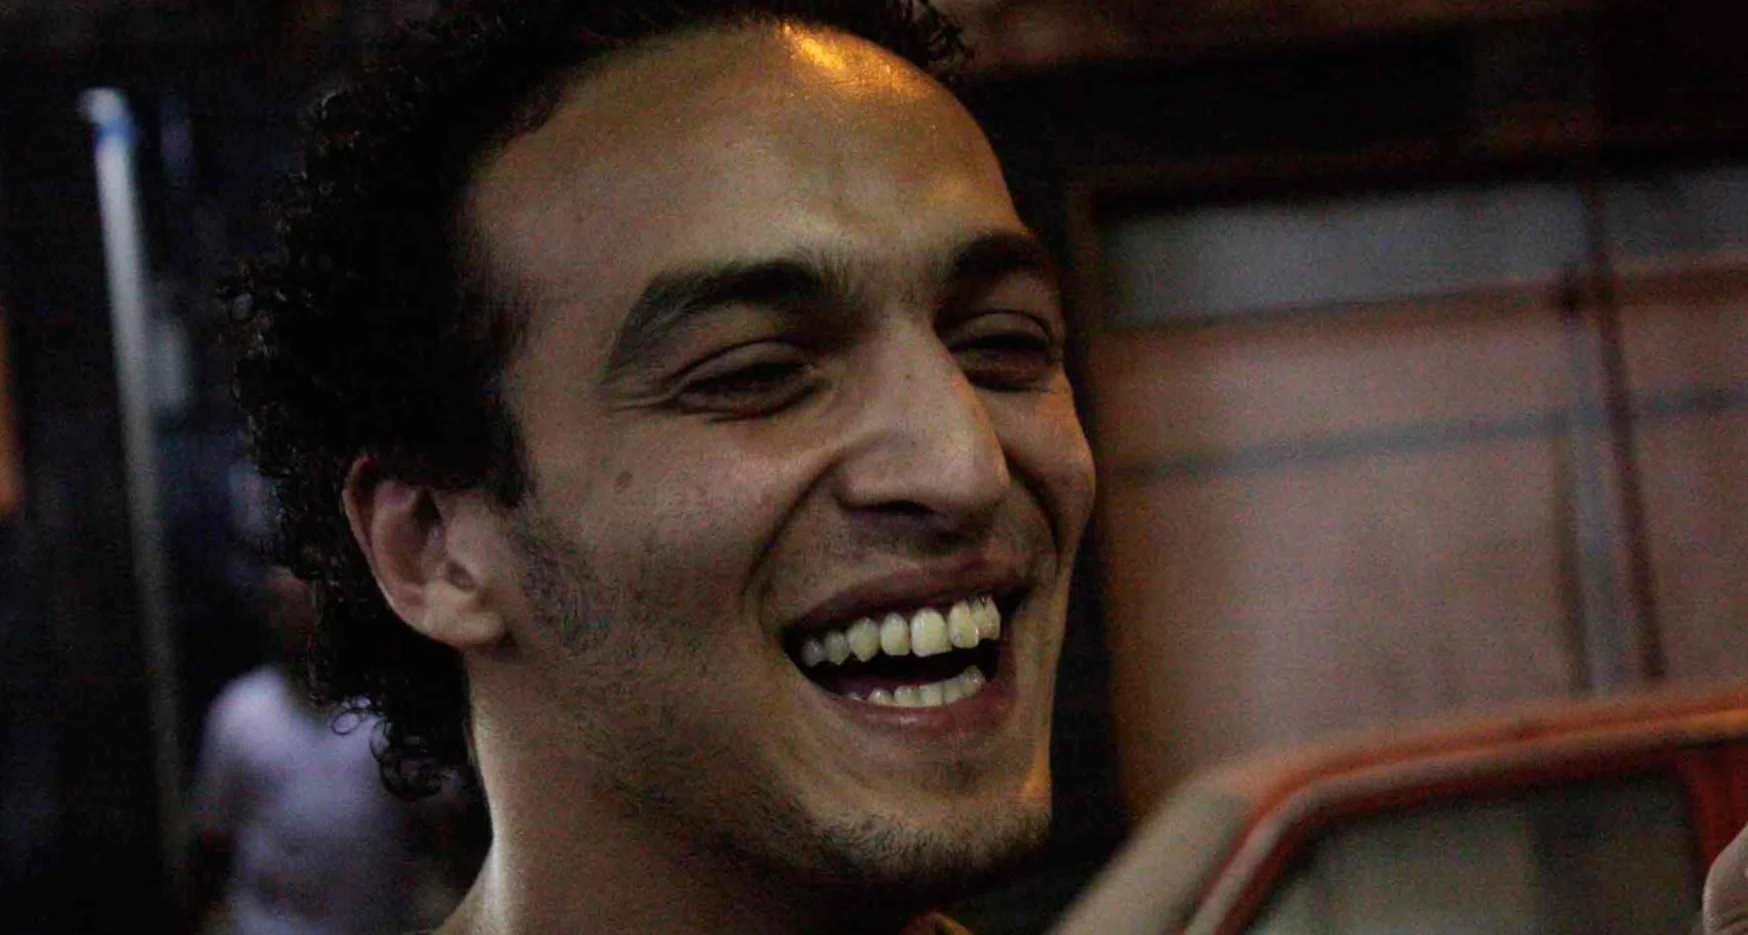 Mahmoud Abou Zeid, also known as Shawkan, laughs at the camera.